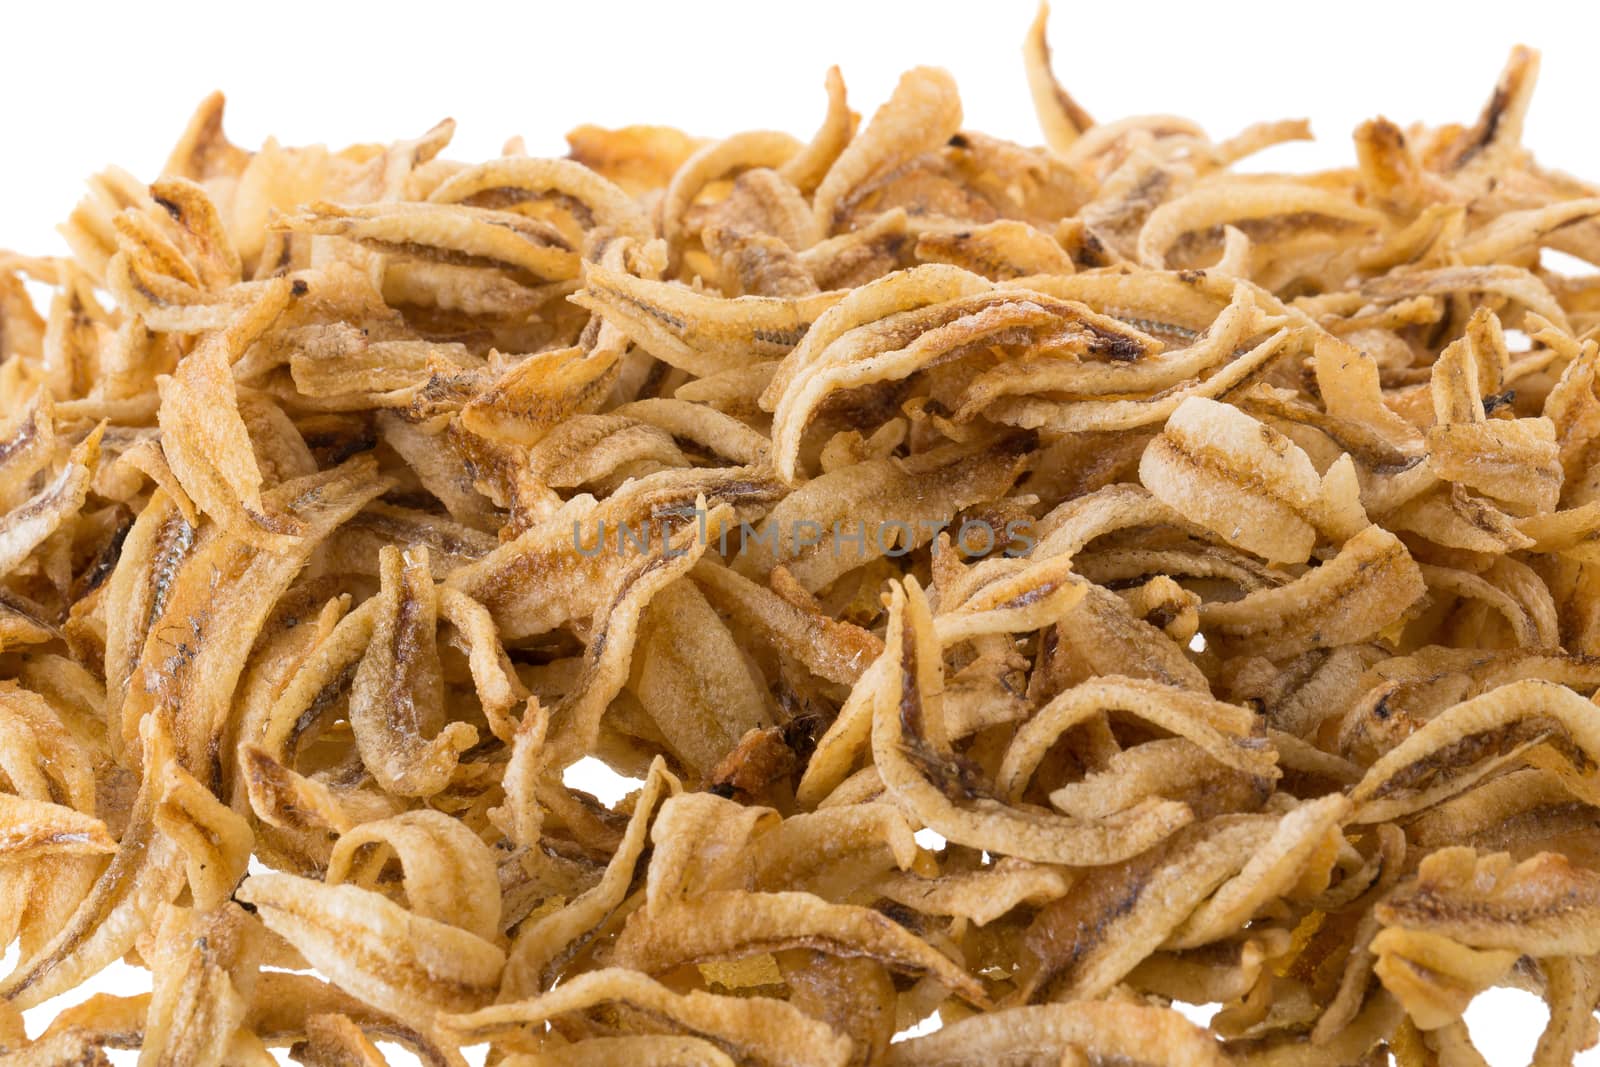 Dried Small fish anchovies and crispy Seafood isolated on white background.